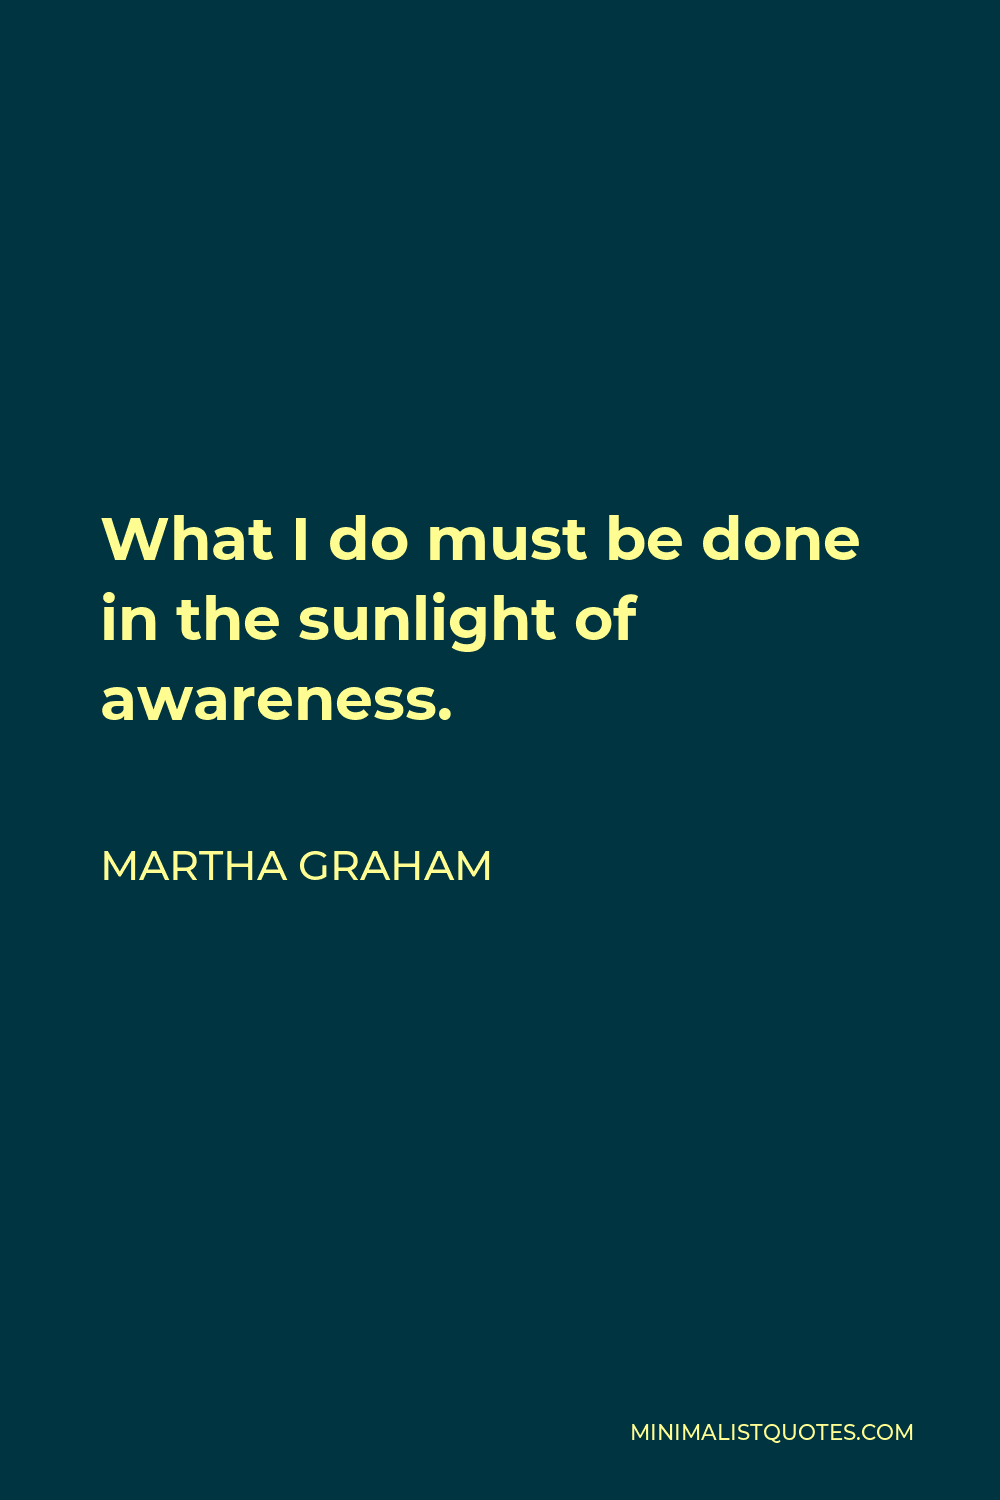 Martha Graham Quote - What I do must be done in the sunlight of awareness.